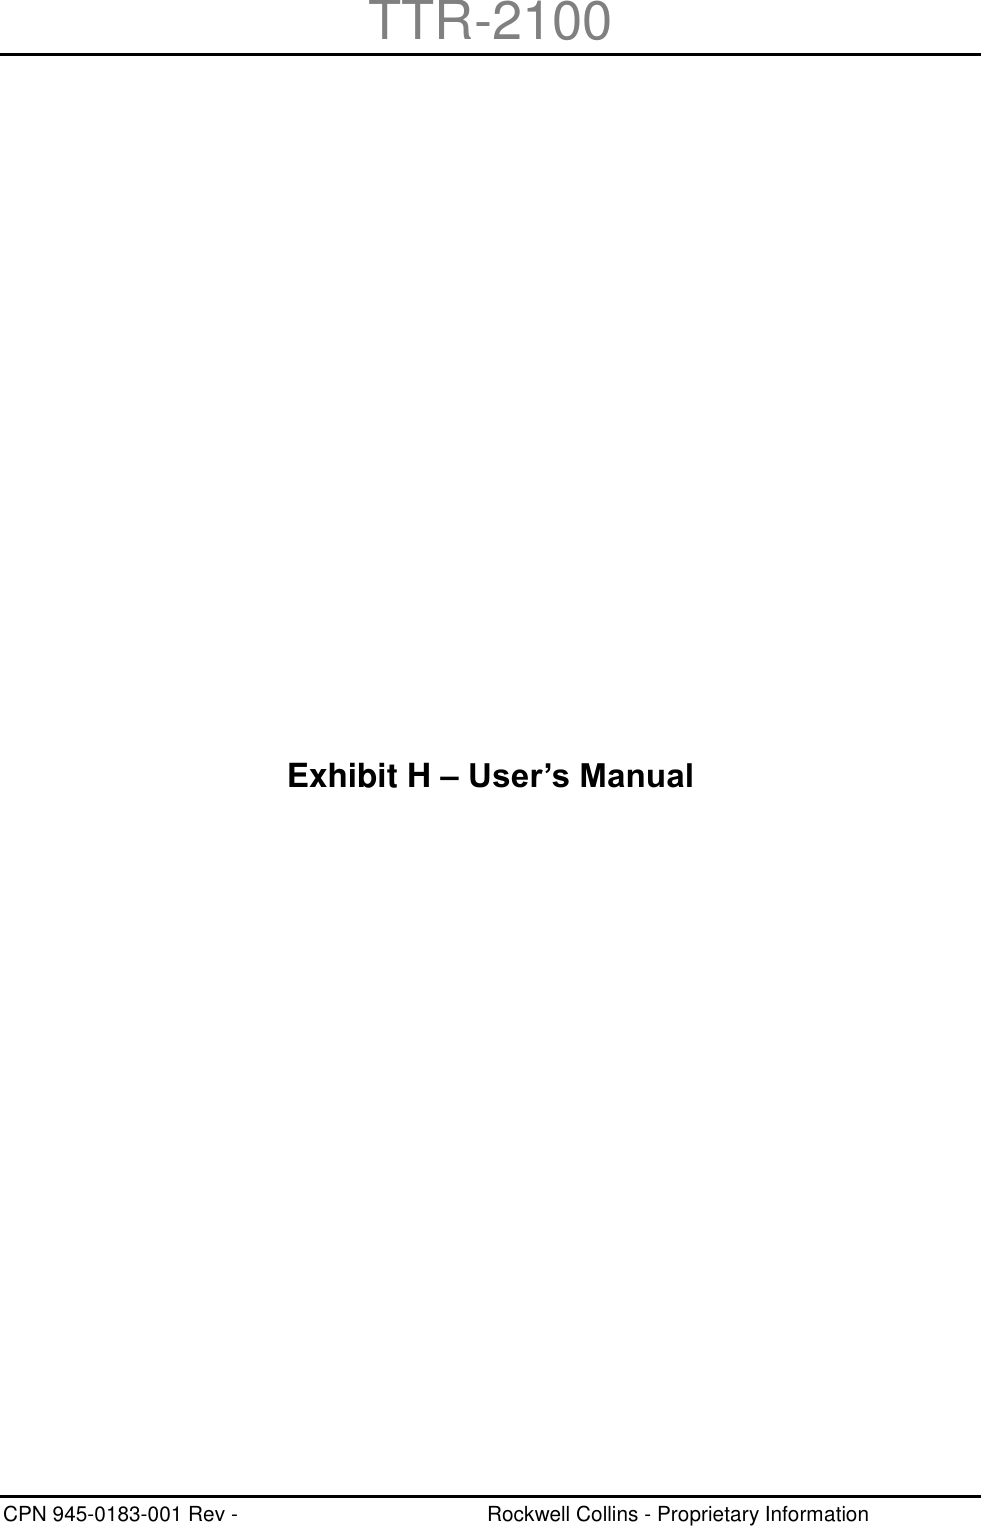 TTR-2100 CPN 945-0183-001 Rev -  Rockwell Collins - Proprietary Information  Page H-1 Exhibit H – User’s Manual 